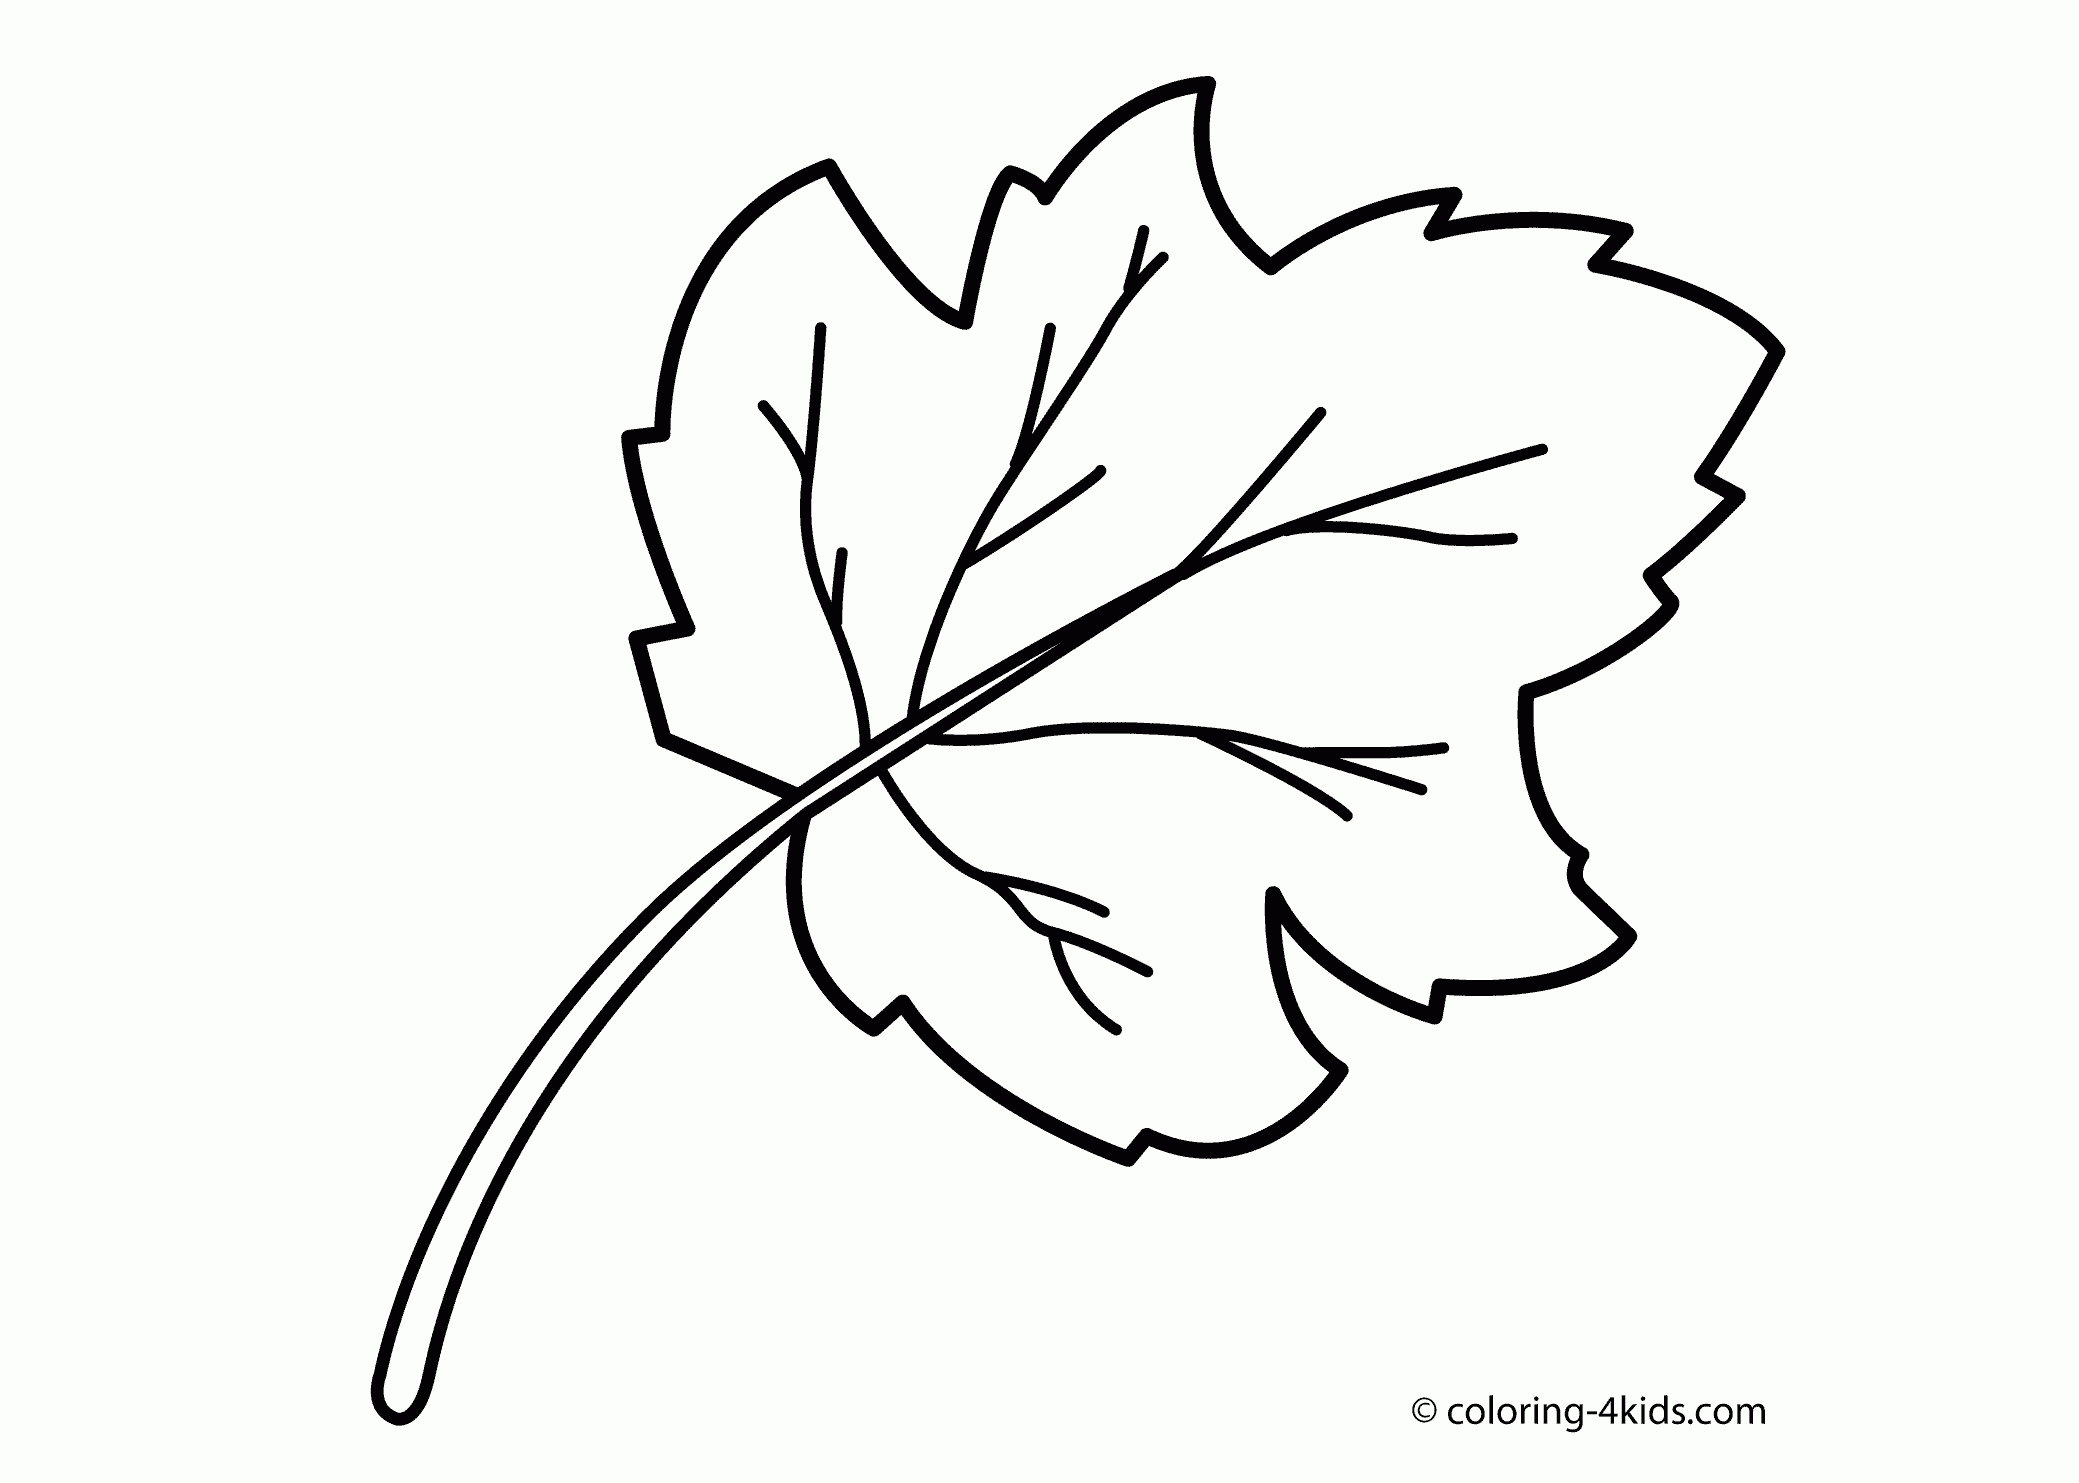 Related Leaf Coloring Pages item-13086, Leaf Coloring Pages Fall ...